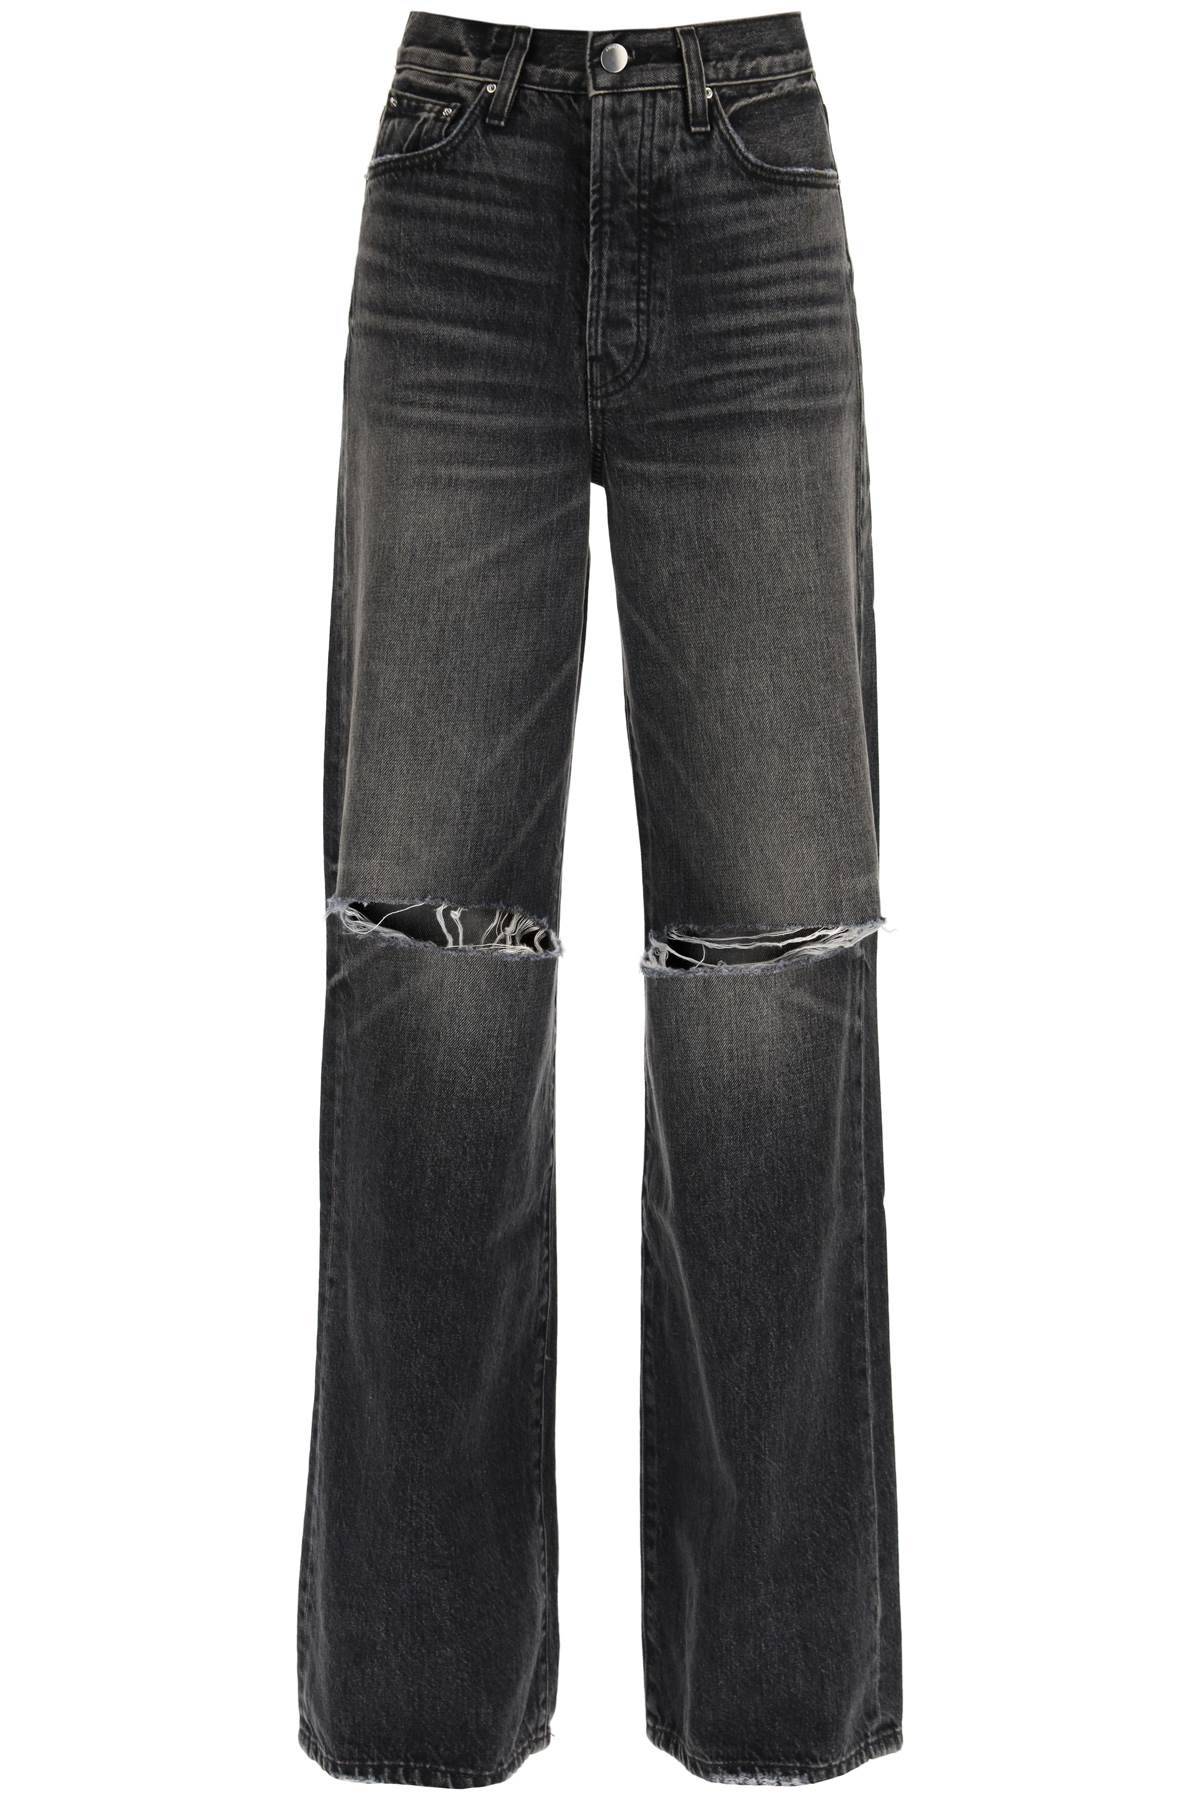 AMIRI ripped jeans with wide leg